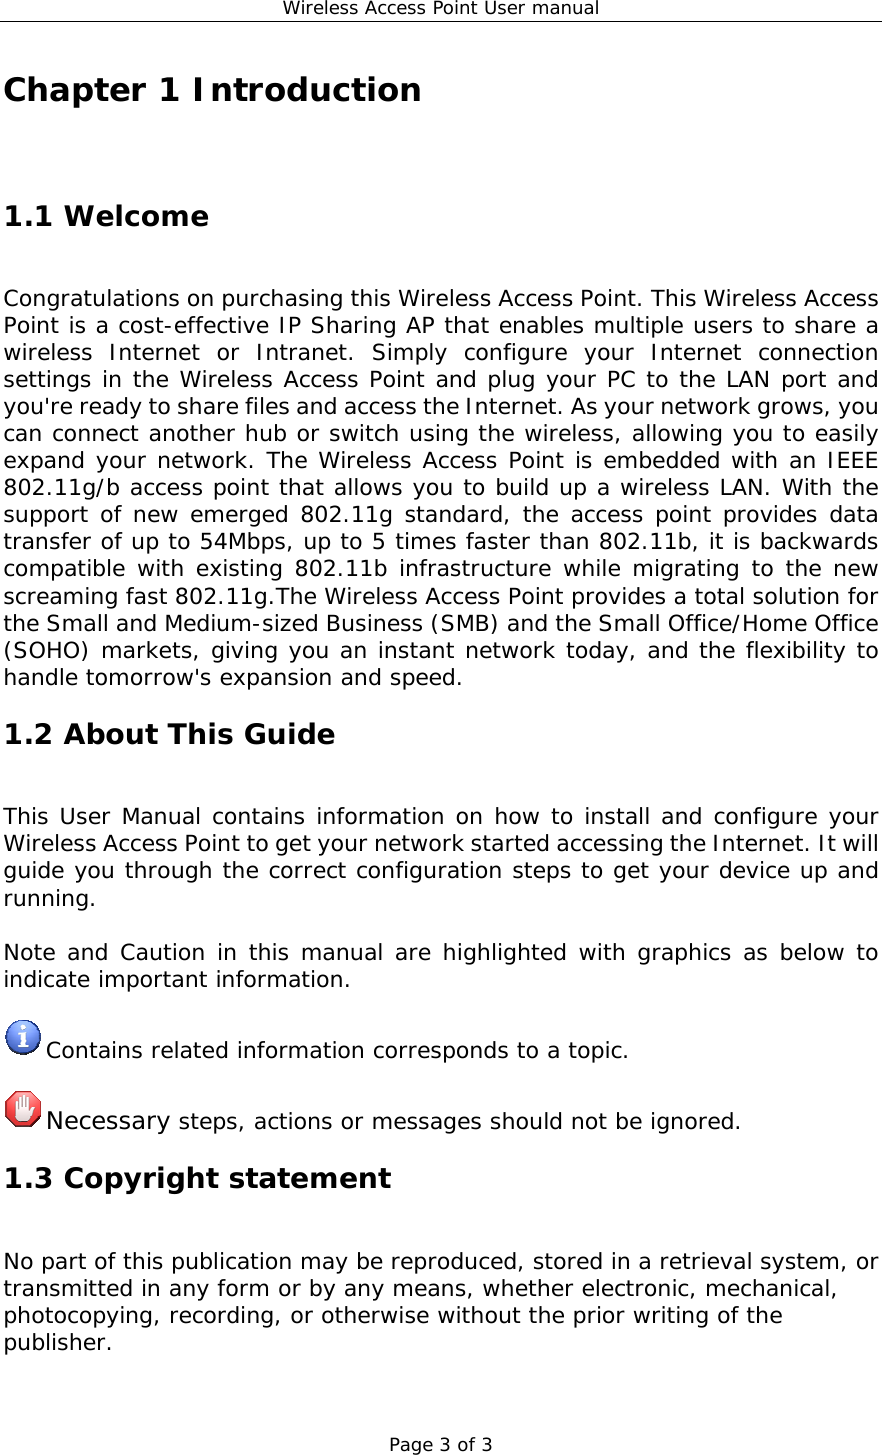 Wireless Access Point User manual Page 3 of 3 Chapter 1 Introduction 1.1 Welcome Congratulations on purchasing this Wireless Access Point. This Wireless Access Point is a cost-effective IP Sharing AP that enables multiple users to share a wireless Internet or Intranet. Simply configure your Internet connection settings in the Wireless Access Point and plug your PC to the LAN port and you&apos;re ready to share files and access the Internet. As your network grows, you can connect another hub or switch using the wireless, allowing you to easily expand your network. The Wireless Access Point is embedded with an IEEE 802.11g/b access point that allows you to build up a wireless LAN. With the support of new emerged 802.11g standard, the access point provides data transfer of up to 54Mbps, up to 5 times faster than 802.11b, it is backwards compatible with existing 802.11b infrastructure while migrating to the new screaming fast 802.11g.The Wireless Access Point provides a total solution for the Small and Medium-sized Business (SMB) and the Small Office/Home Office (SOHO) markets, giving you an instant network today, and the flexibility to handle tomorrow&apos;s expansion and speed. 1.2 About This Guide This User Manual contains information on how to install and configure your Wireless Access Point to get your network started accessing the Internet. It will guide you through the correct configuration steps to get your device up and running.  Note and Caution in this manual are highlighted with graphics as below to indicate important information.   Contains related information corresponds to a topic.   Necessary steps, actions or messages should not be ignored. 1.3 Copyright statement No part of this publication may be reproduced, stored in a retrieval system, or transmitted in any form or by any means, whether electronic, mechanical, photocopying, recording, or otherwise without the prior writing of the publisher. 